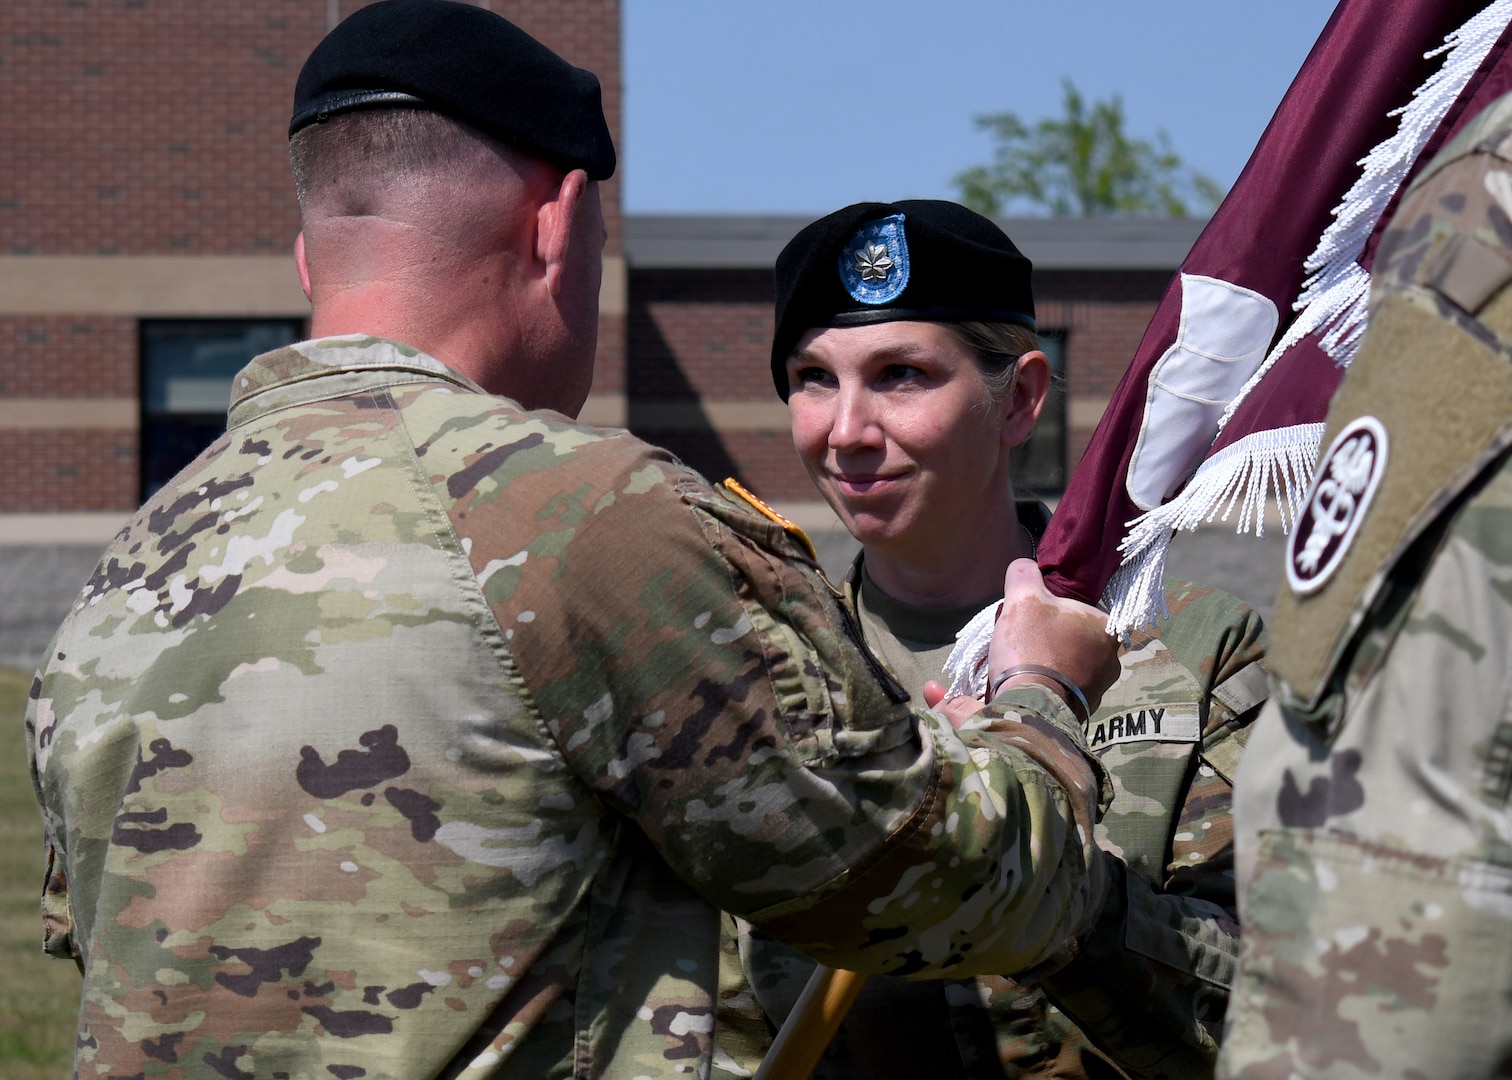 U.S. Army Lt. Col. Lisa M. Heiss, the new commander of the Soldier Recovery Unit – Fort Drum, receives the unit’s flag, or colors, from Col. Matthew J. Mapes, commander of the U.S. Army Medical Department Activity – Fort Drum, during a change of command ceremony at Fort Drum, N.Y., June 20, 2023.